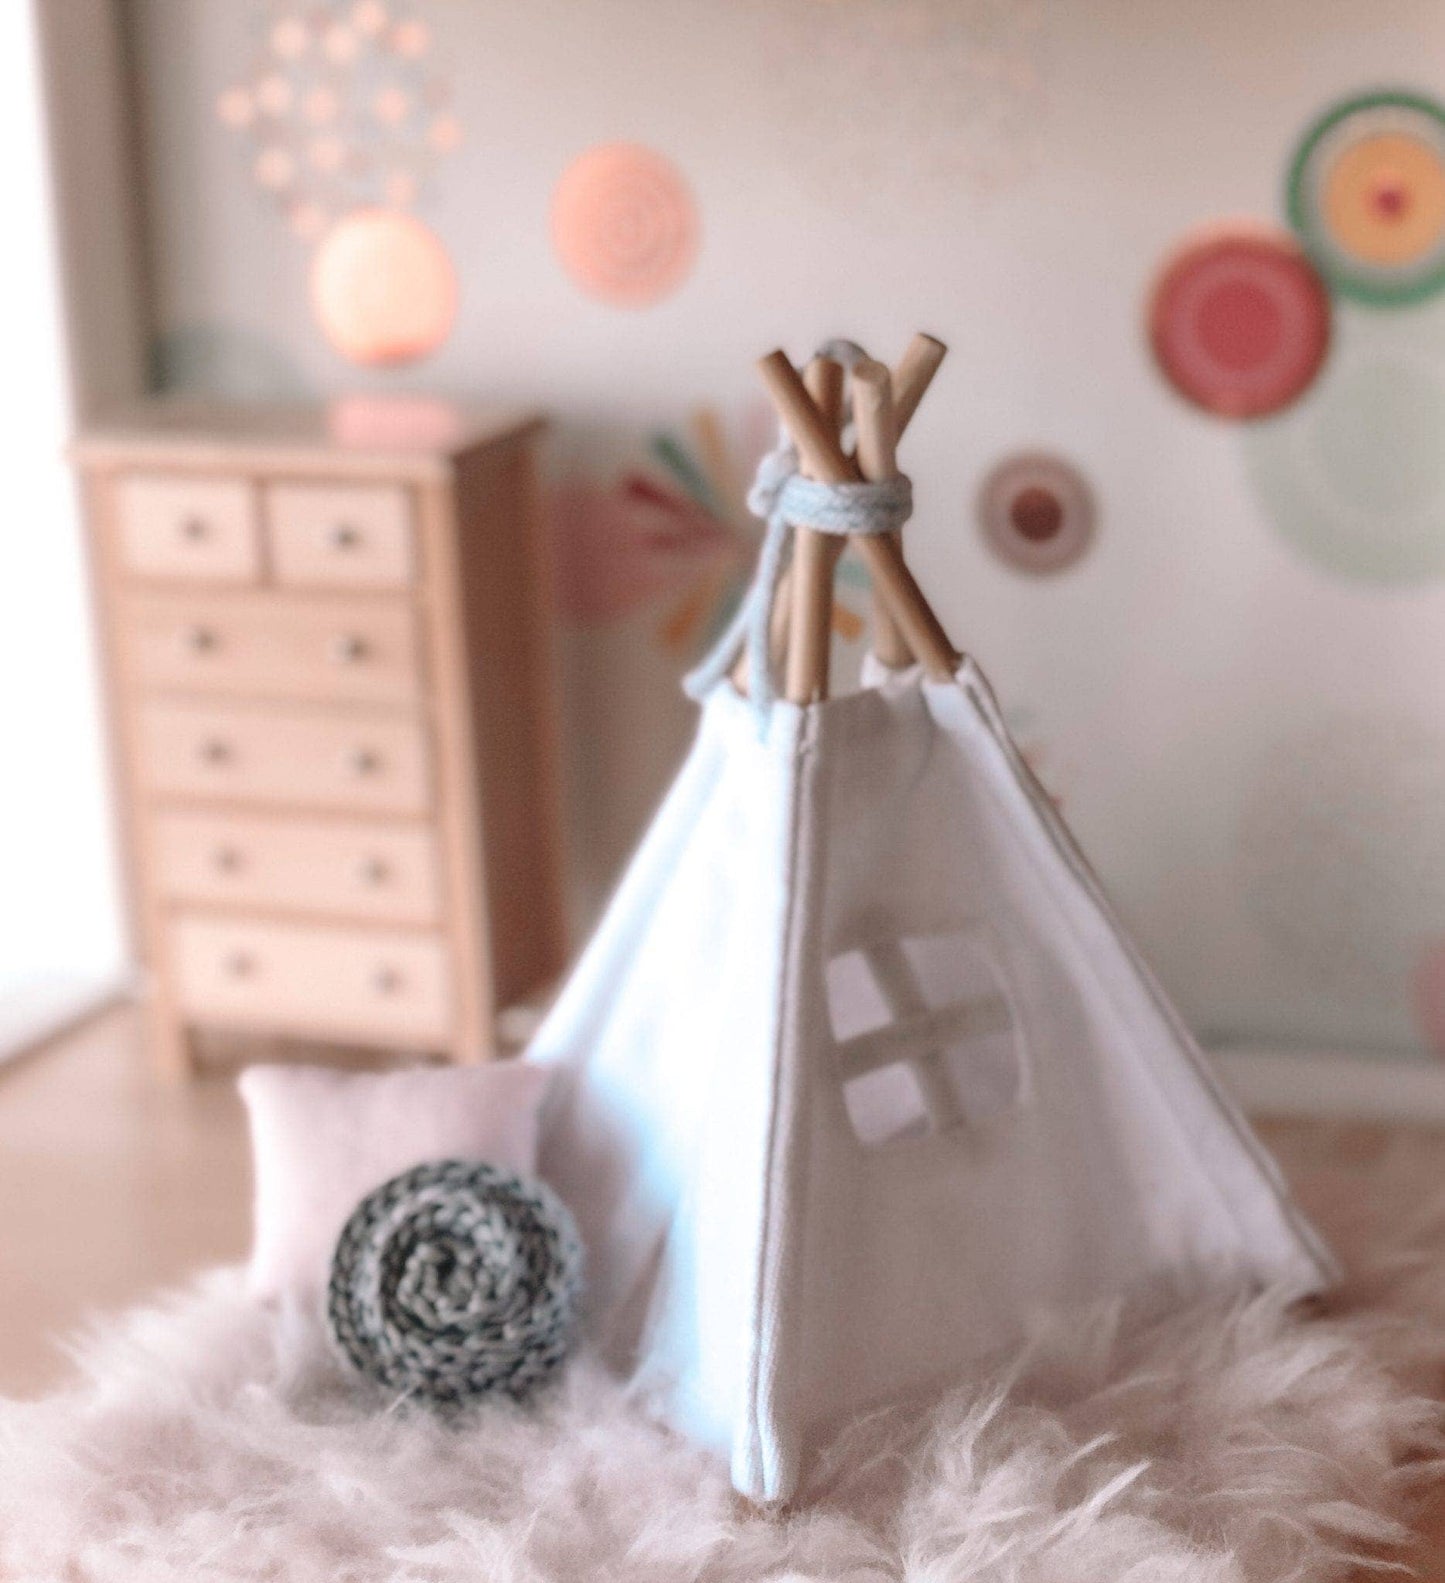 Dollhouse Play Tent with Window | Multiple Colors